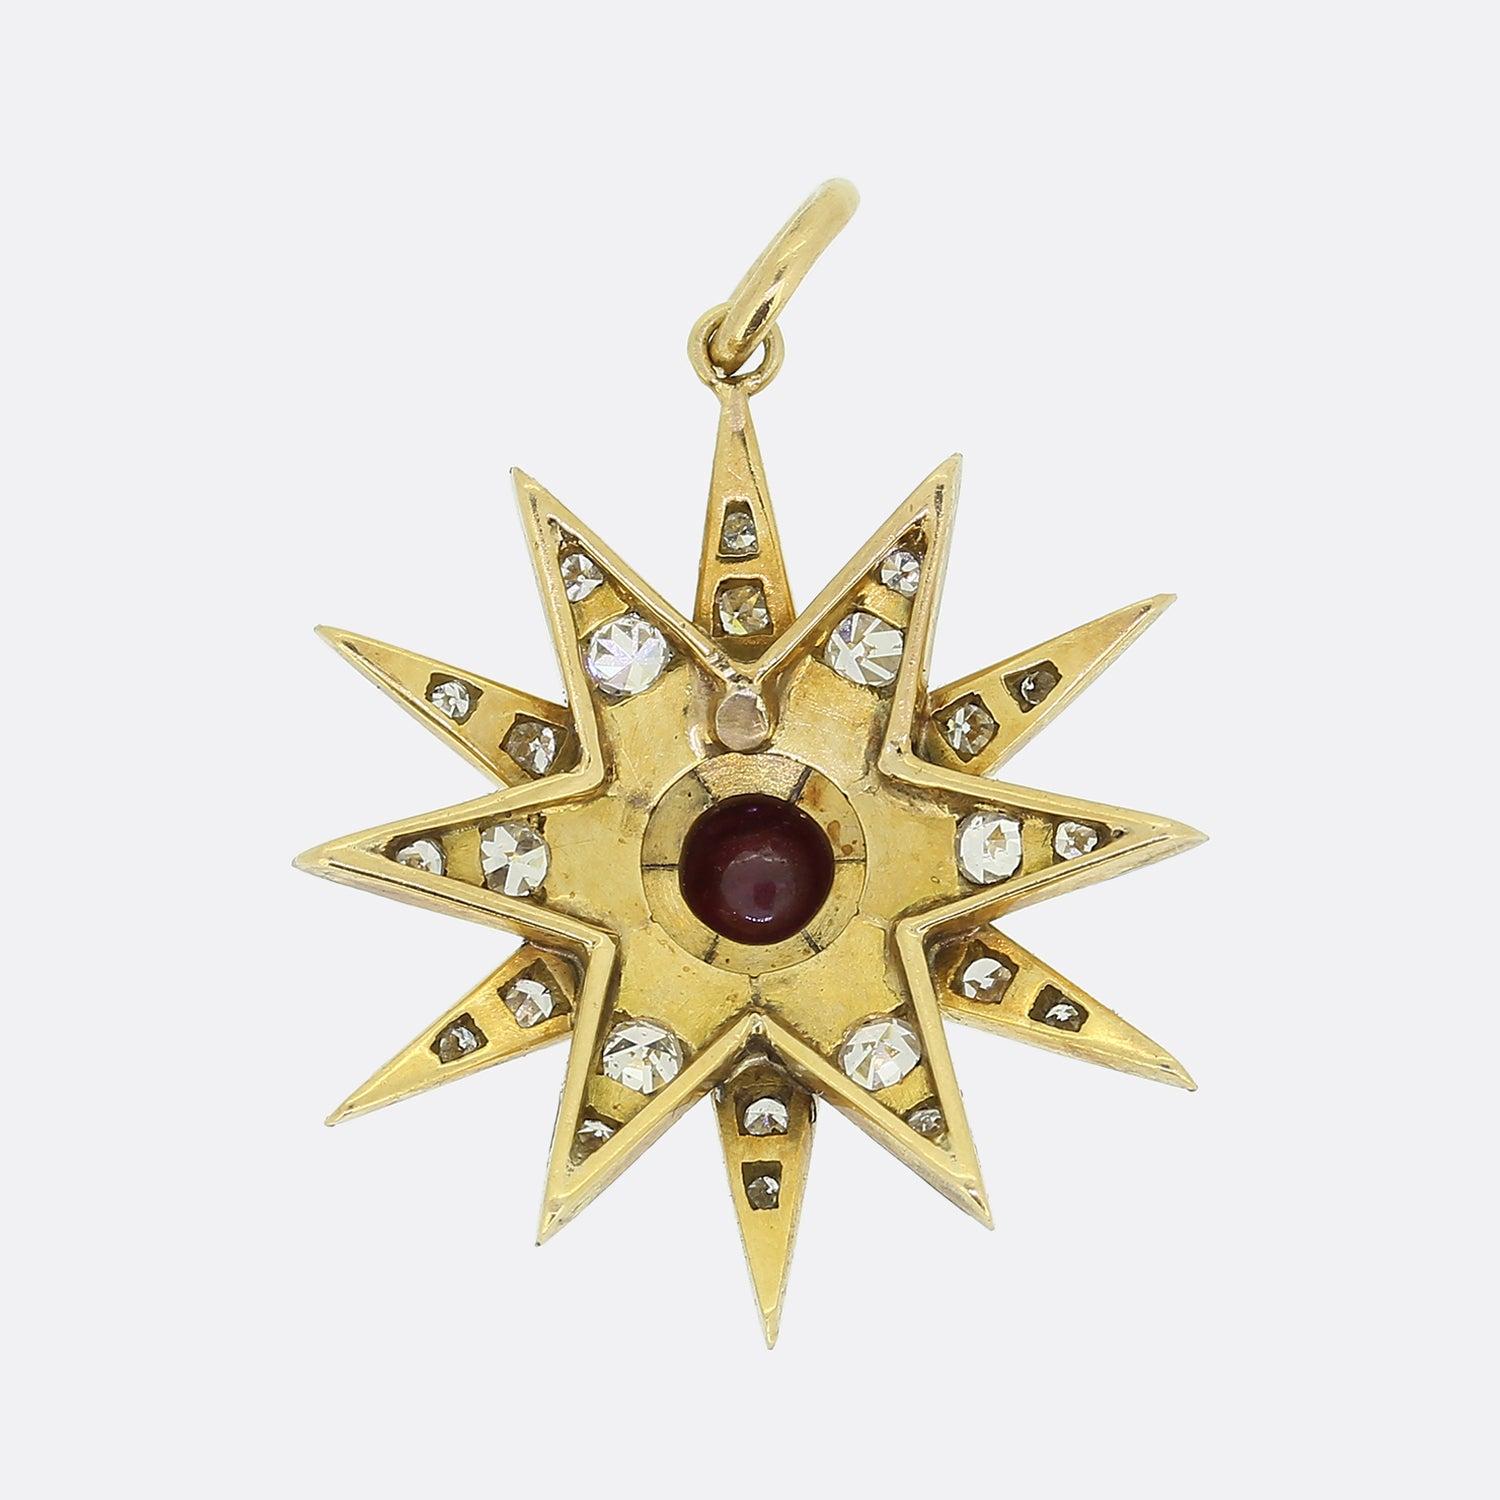 Here we have a wonderful ruby and diamond star pendant dating back to the Edwardian era. This antique piece has been crafted from 18ct yellow gold into the shape of a 12 pointed star. Each channel has been tipped in platinum and set with an array of